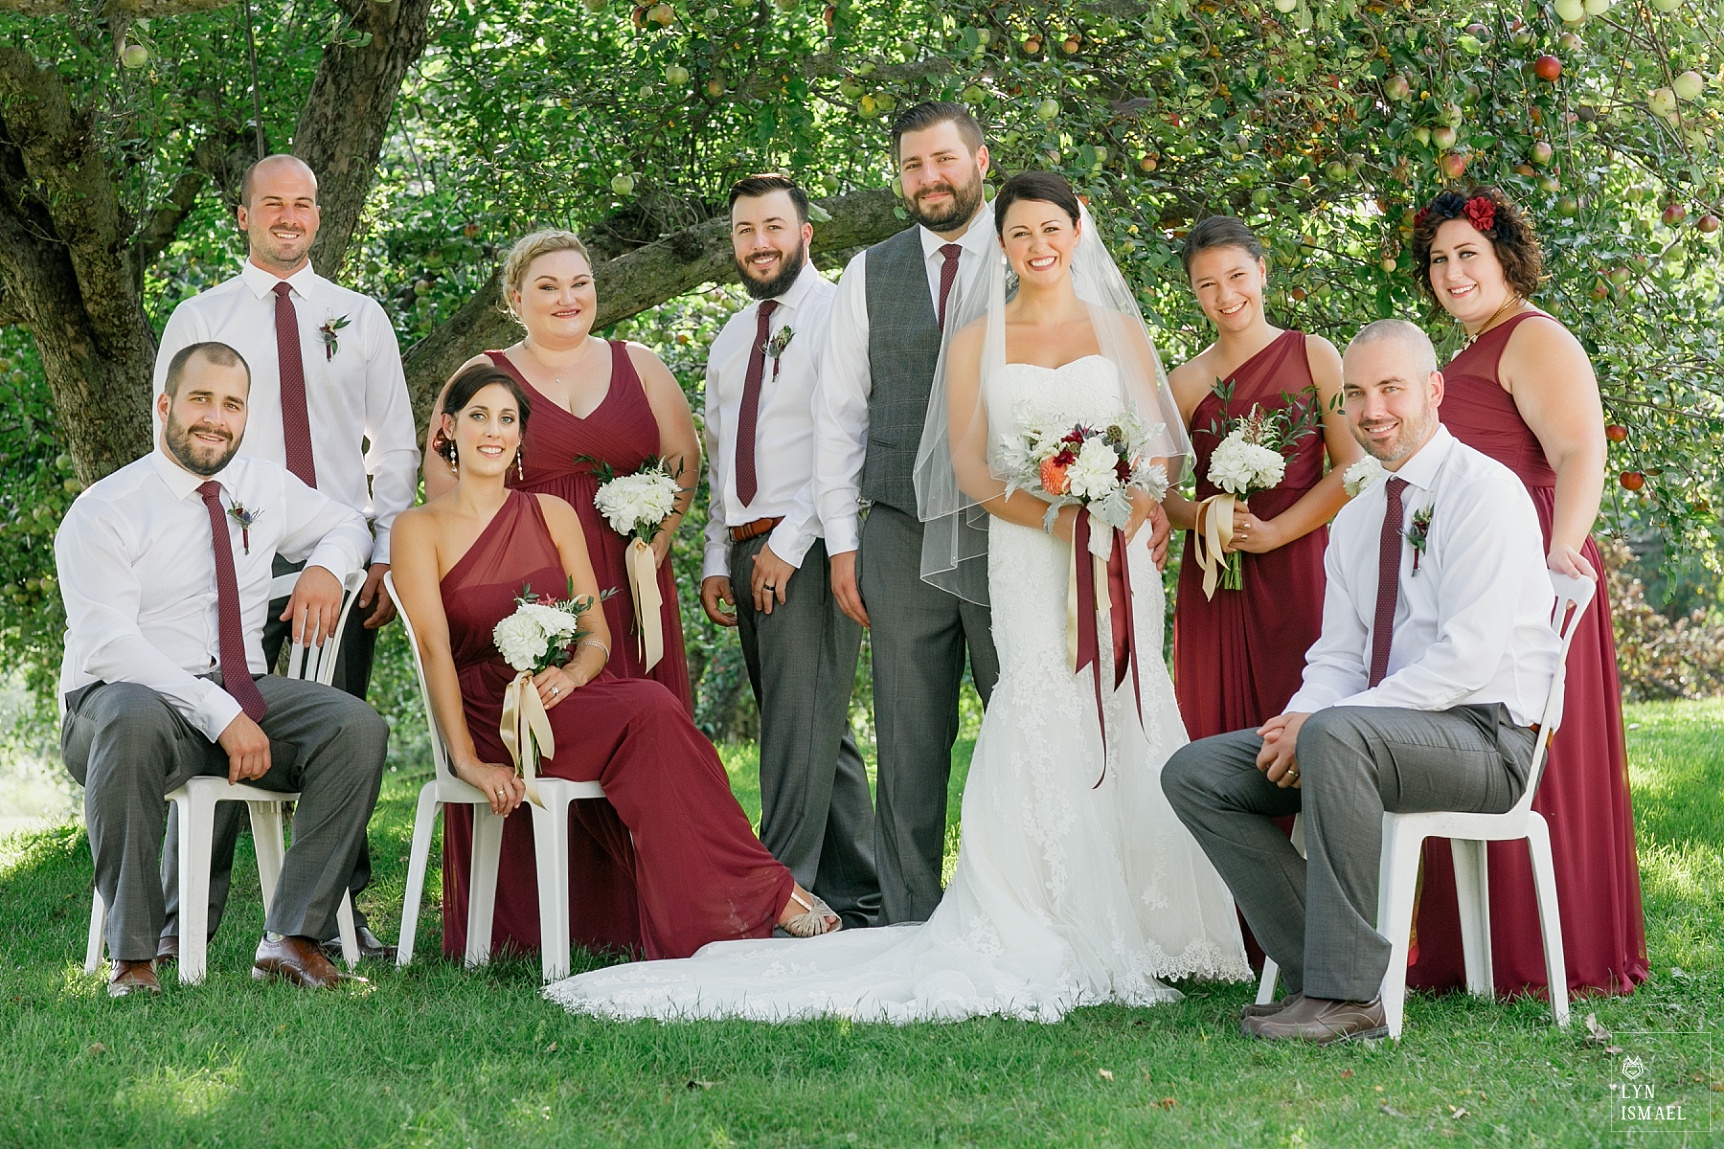 Wedding party photos at Steckle Heritage Farm, bridesmaids wearing burgundy dresses